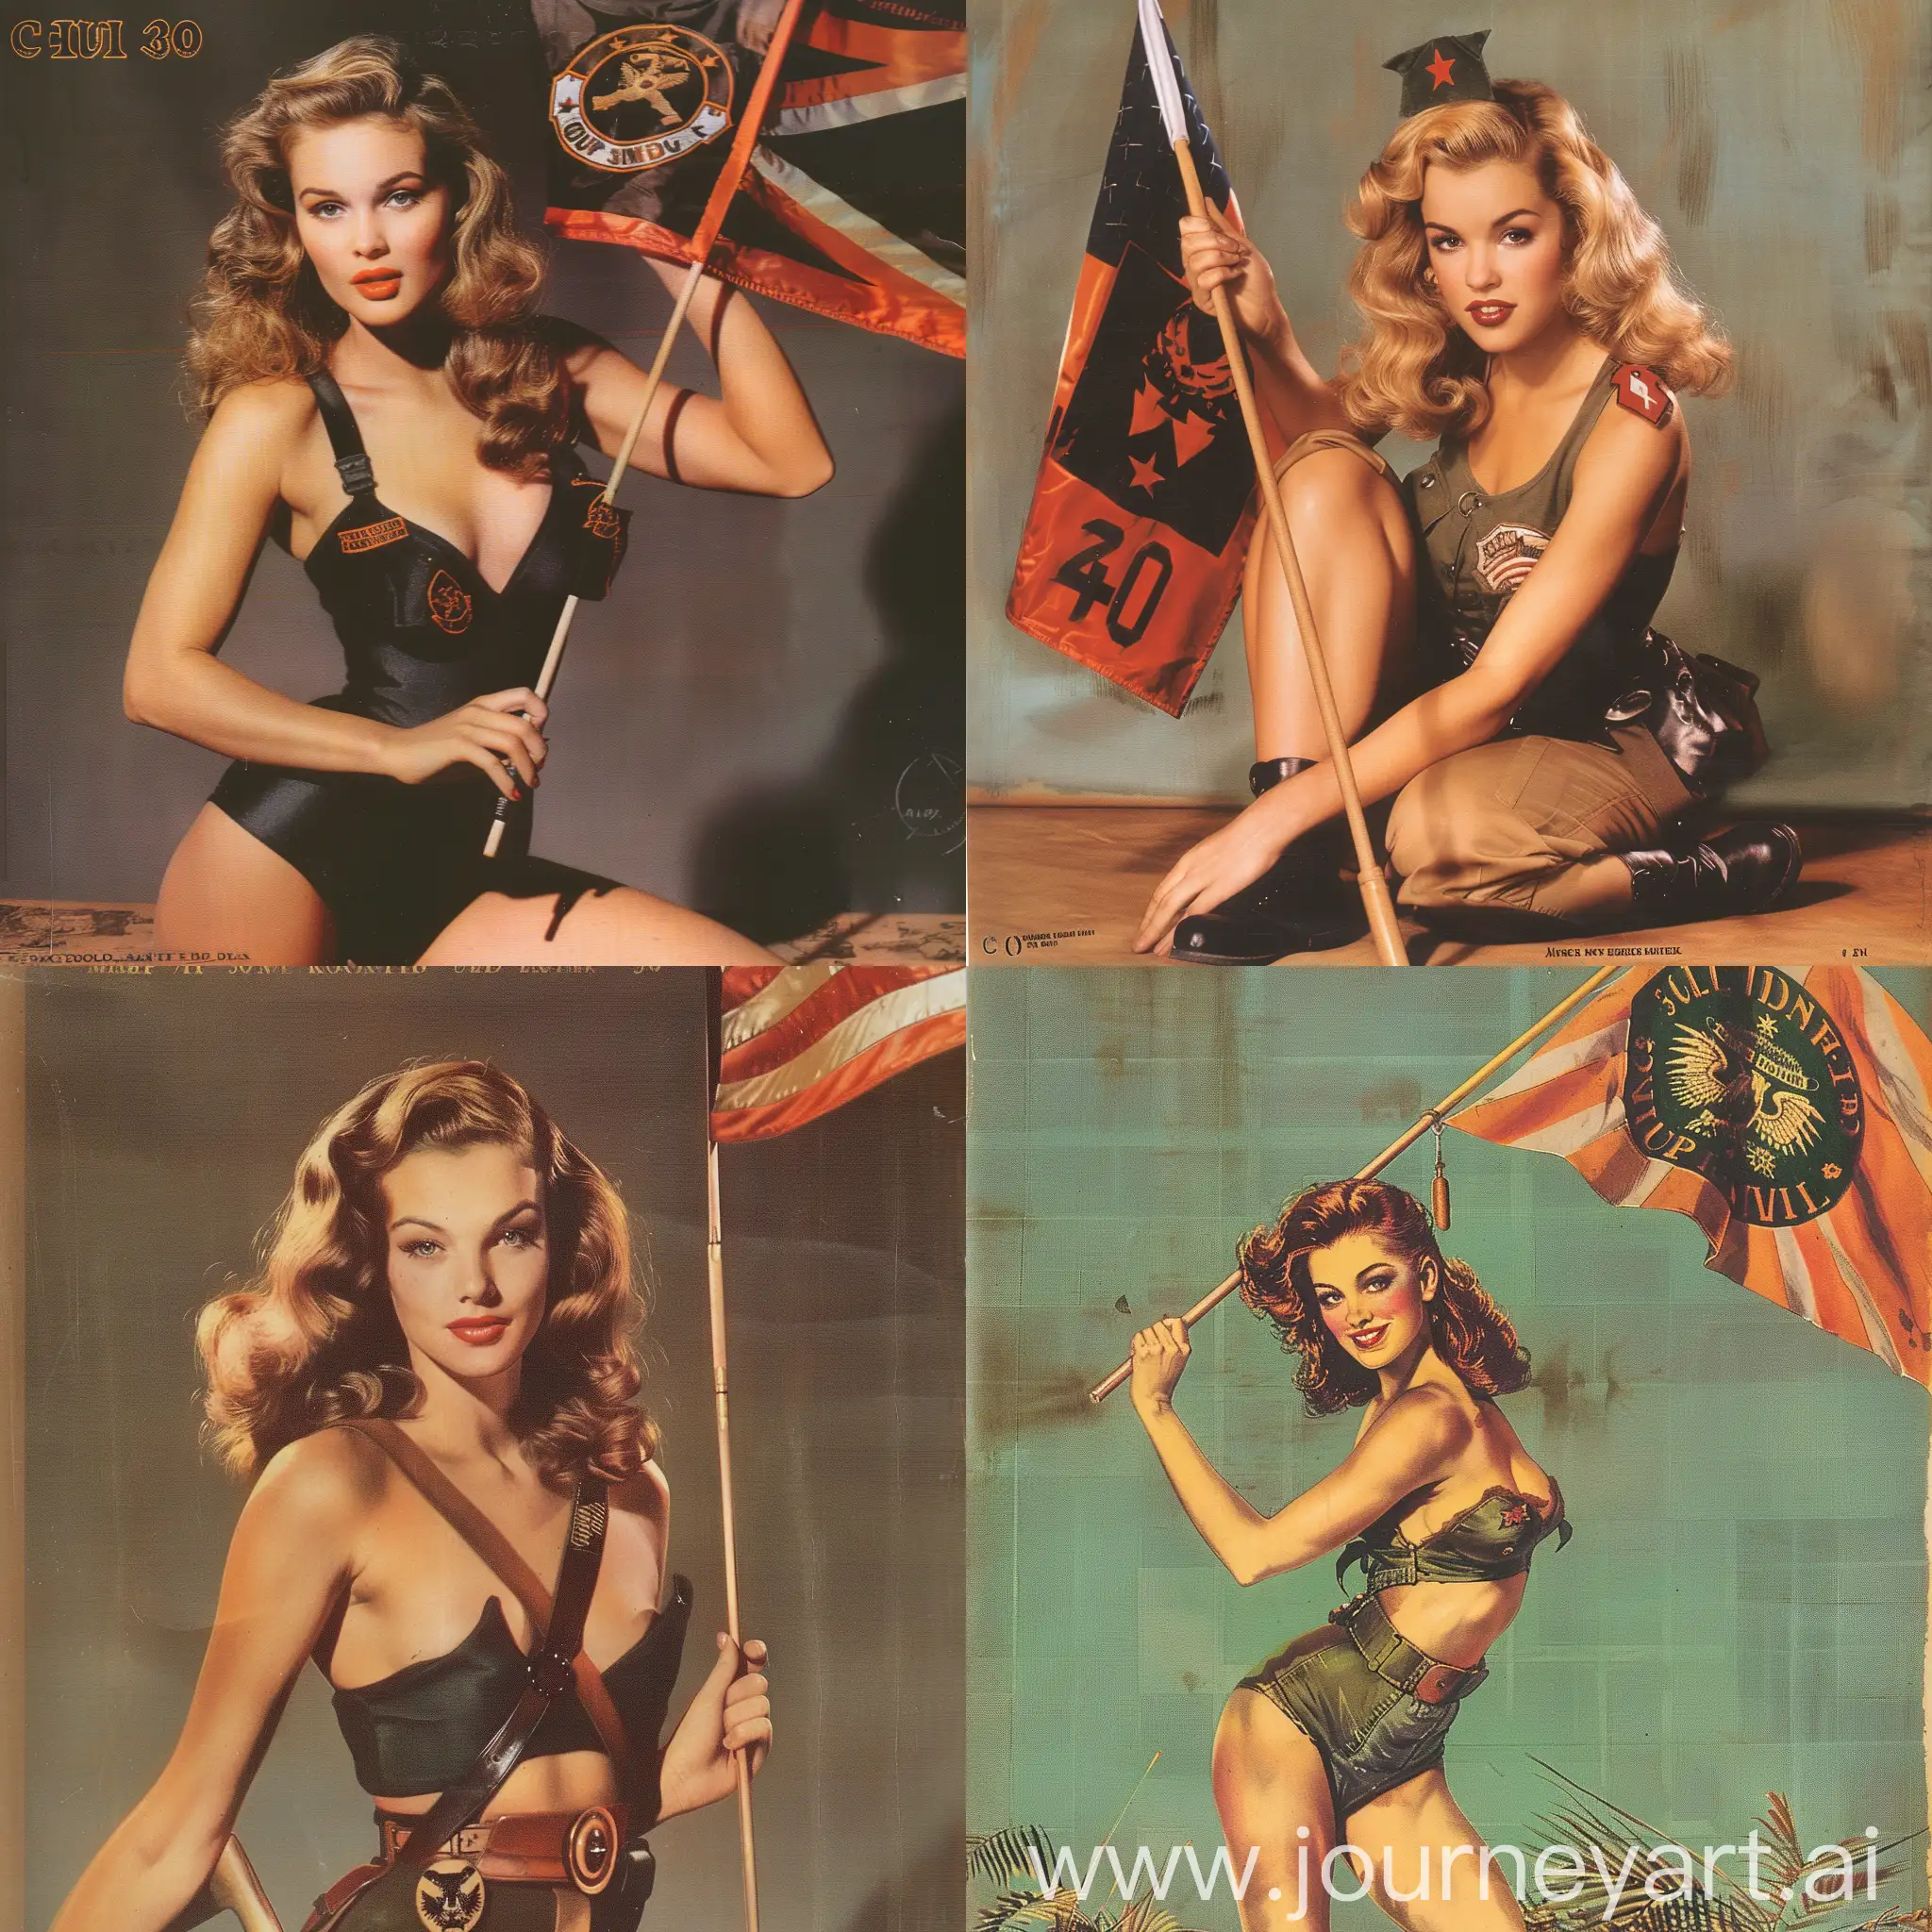 Empowering-Pinup-Women-with-30-Division-Flag-Art